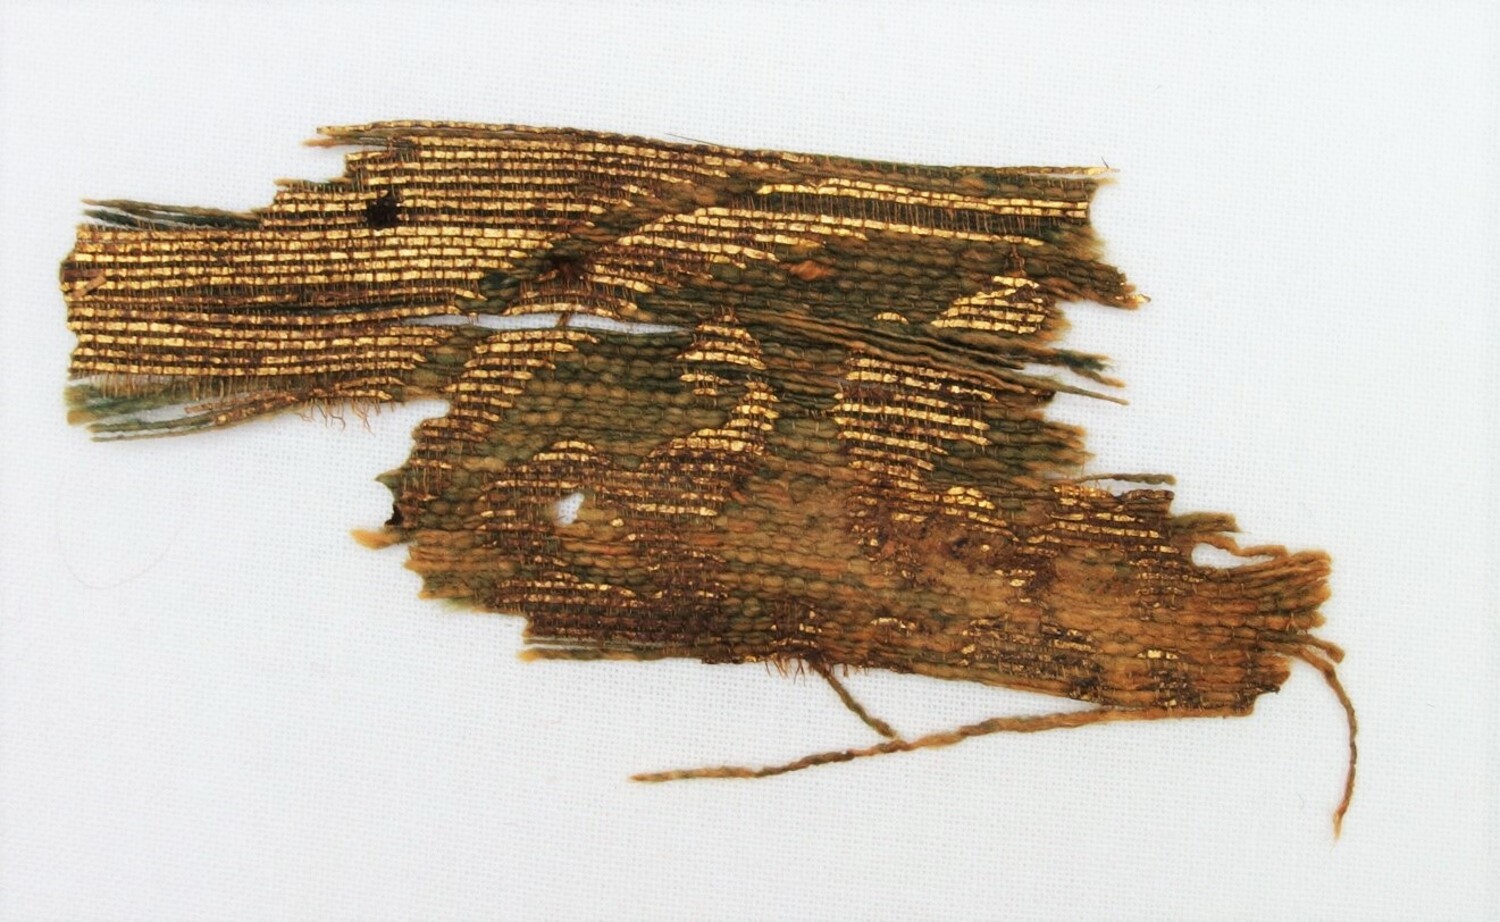 Textile fragment from Jebel Adda, southern Egypt, probably 14th century, woven with gold thread (TRC 2000.0022).